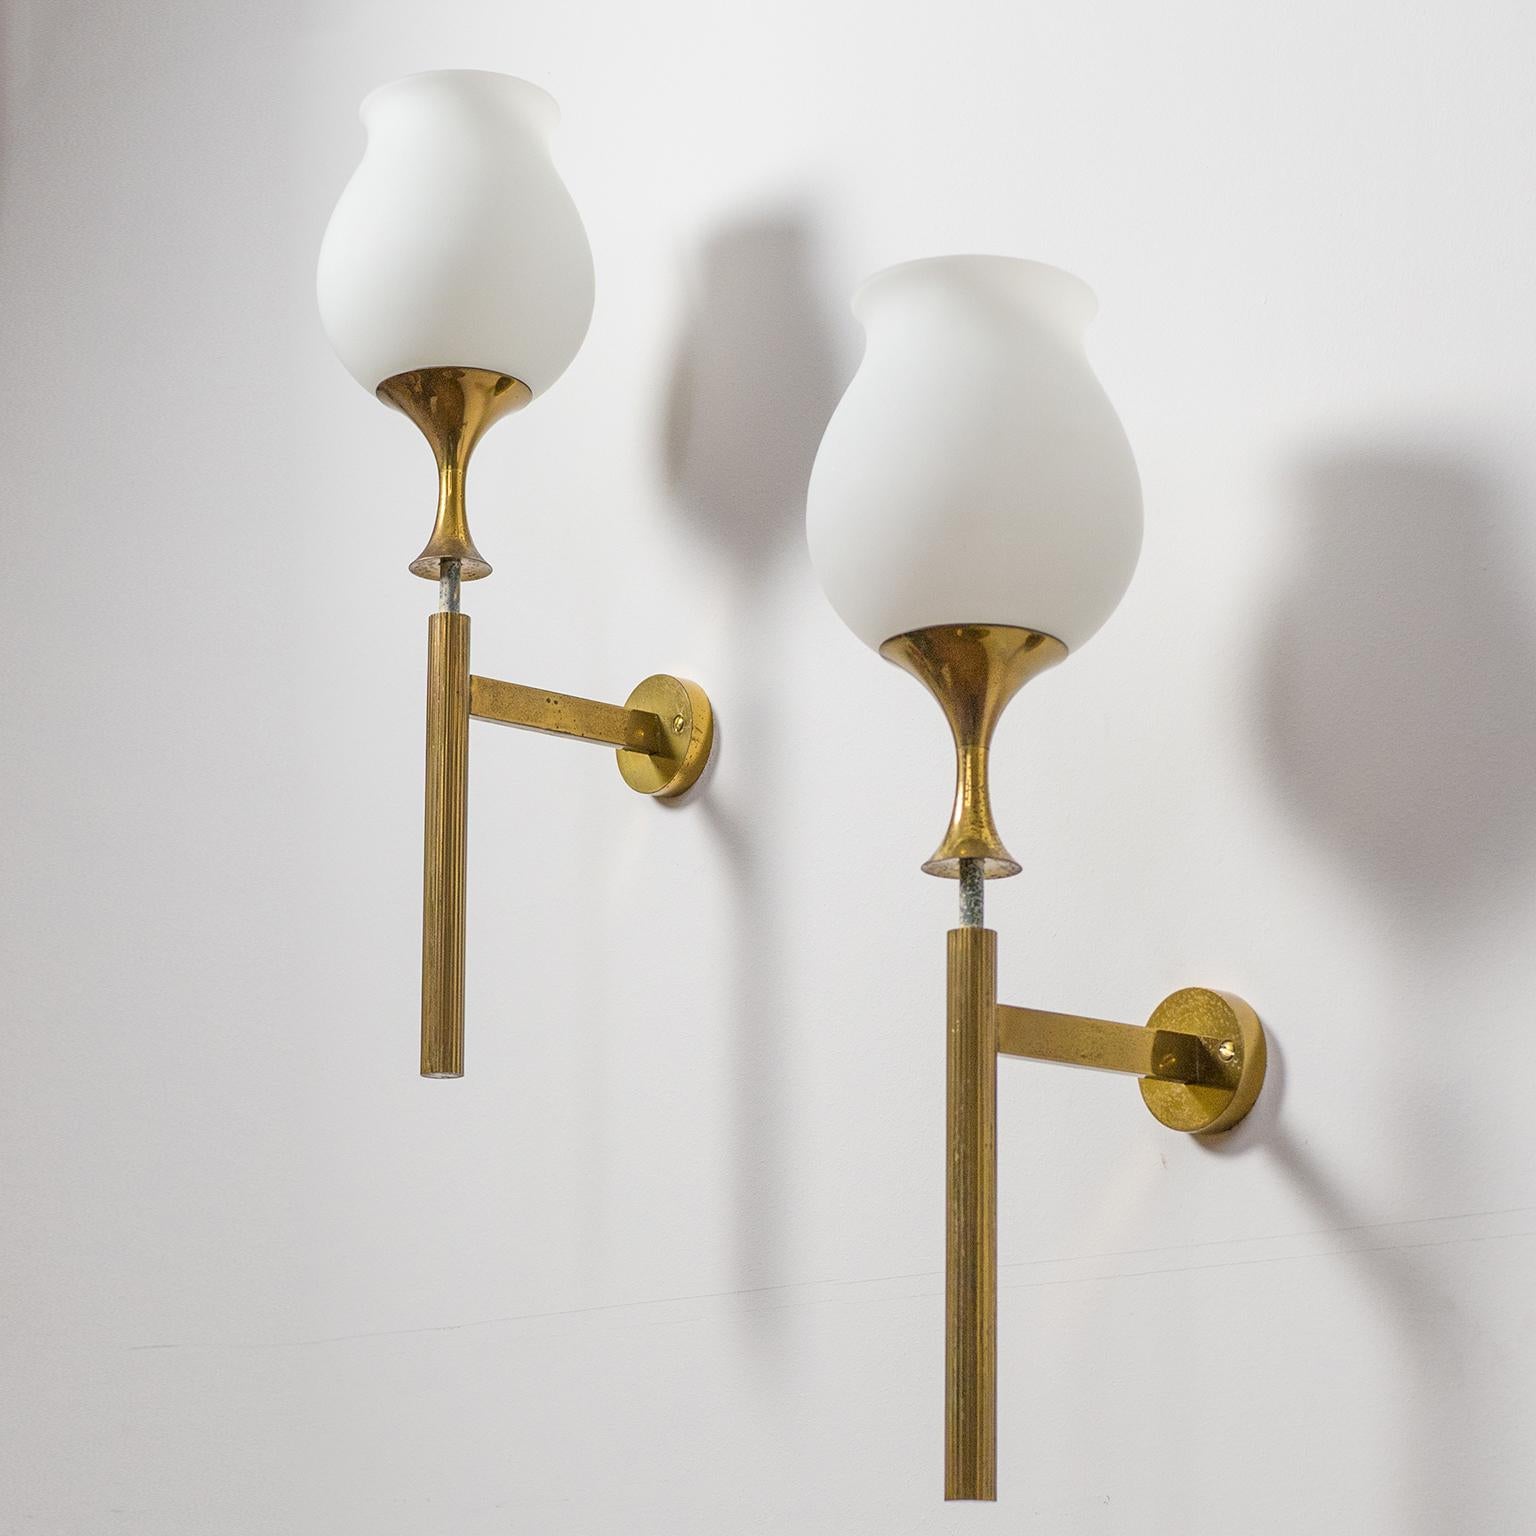 Rare pair of large modernist torch-style wall lights designed by Angelo Lelii for Arredoluce in 1956. All brass hardware with sensuous tulip-shaped blown satin glass diffusers. Nice original condition with some patina on the brass and the off-white